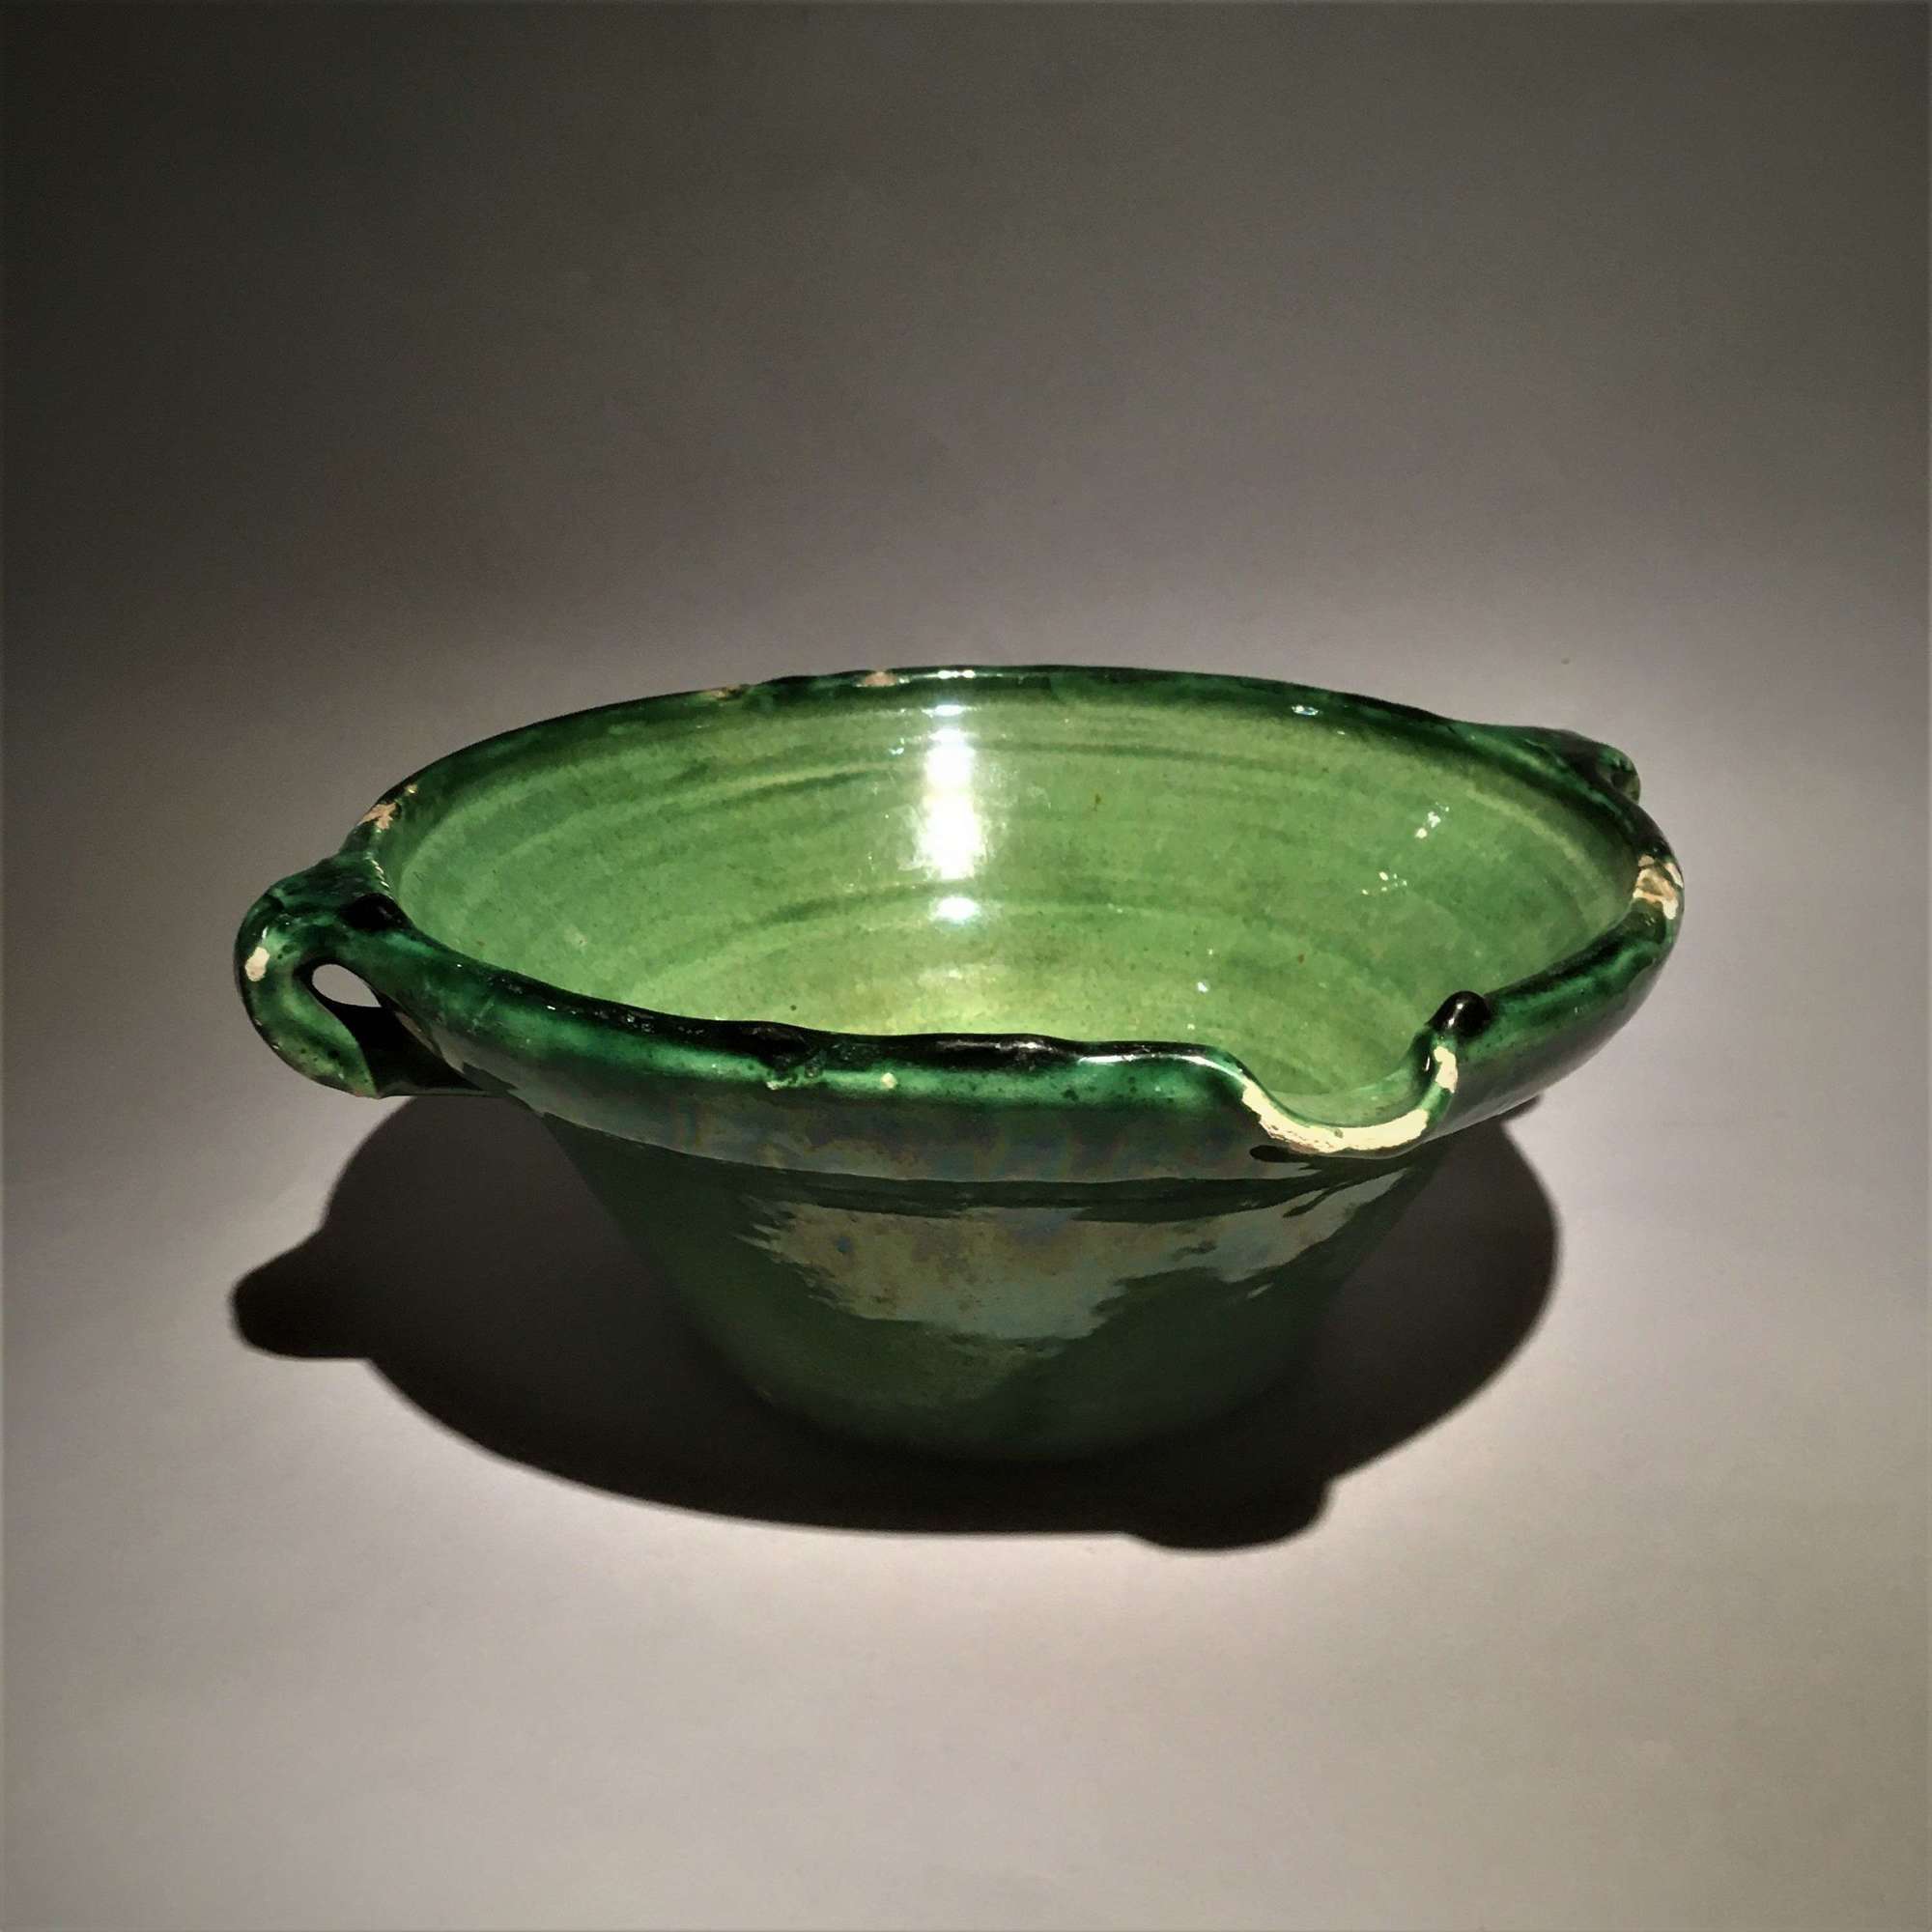 A French green glazed earthenware dairy bowl or 'tian'